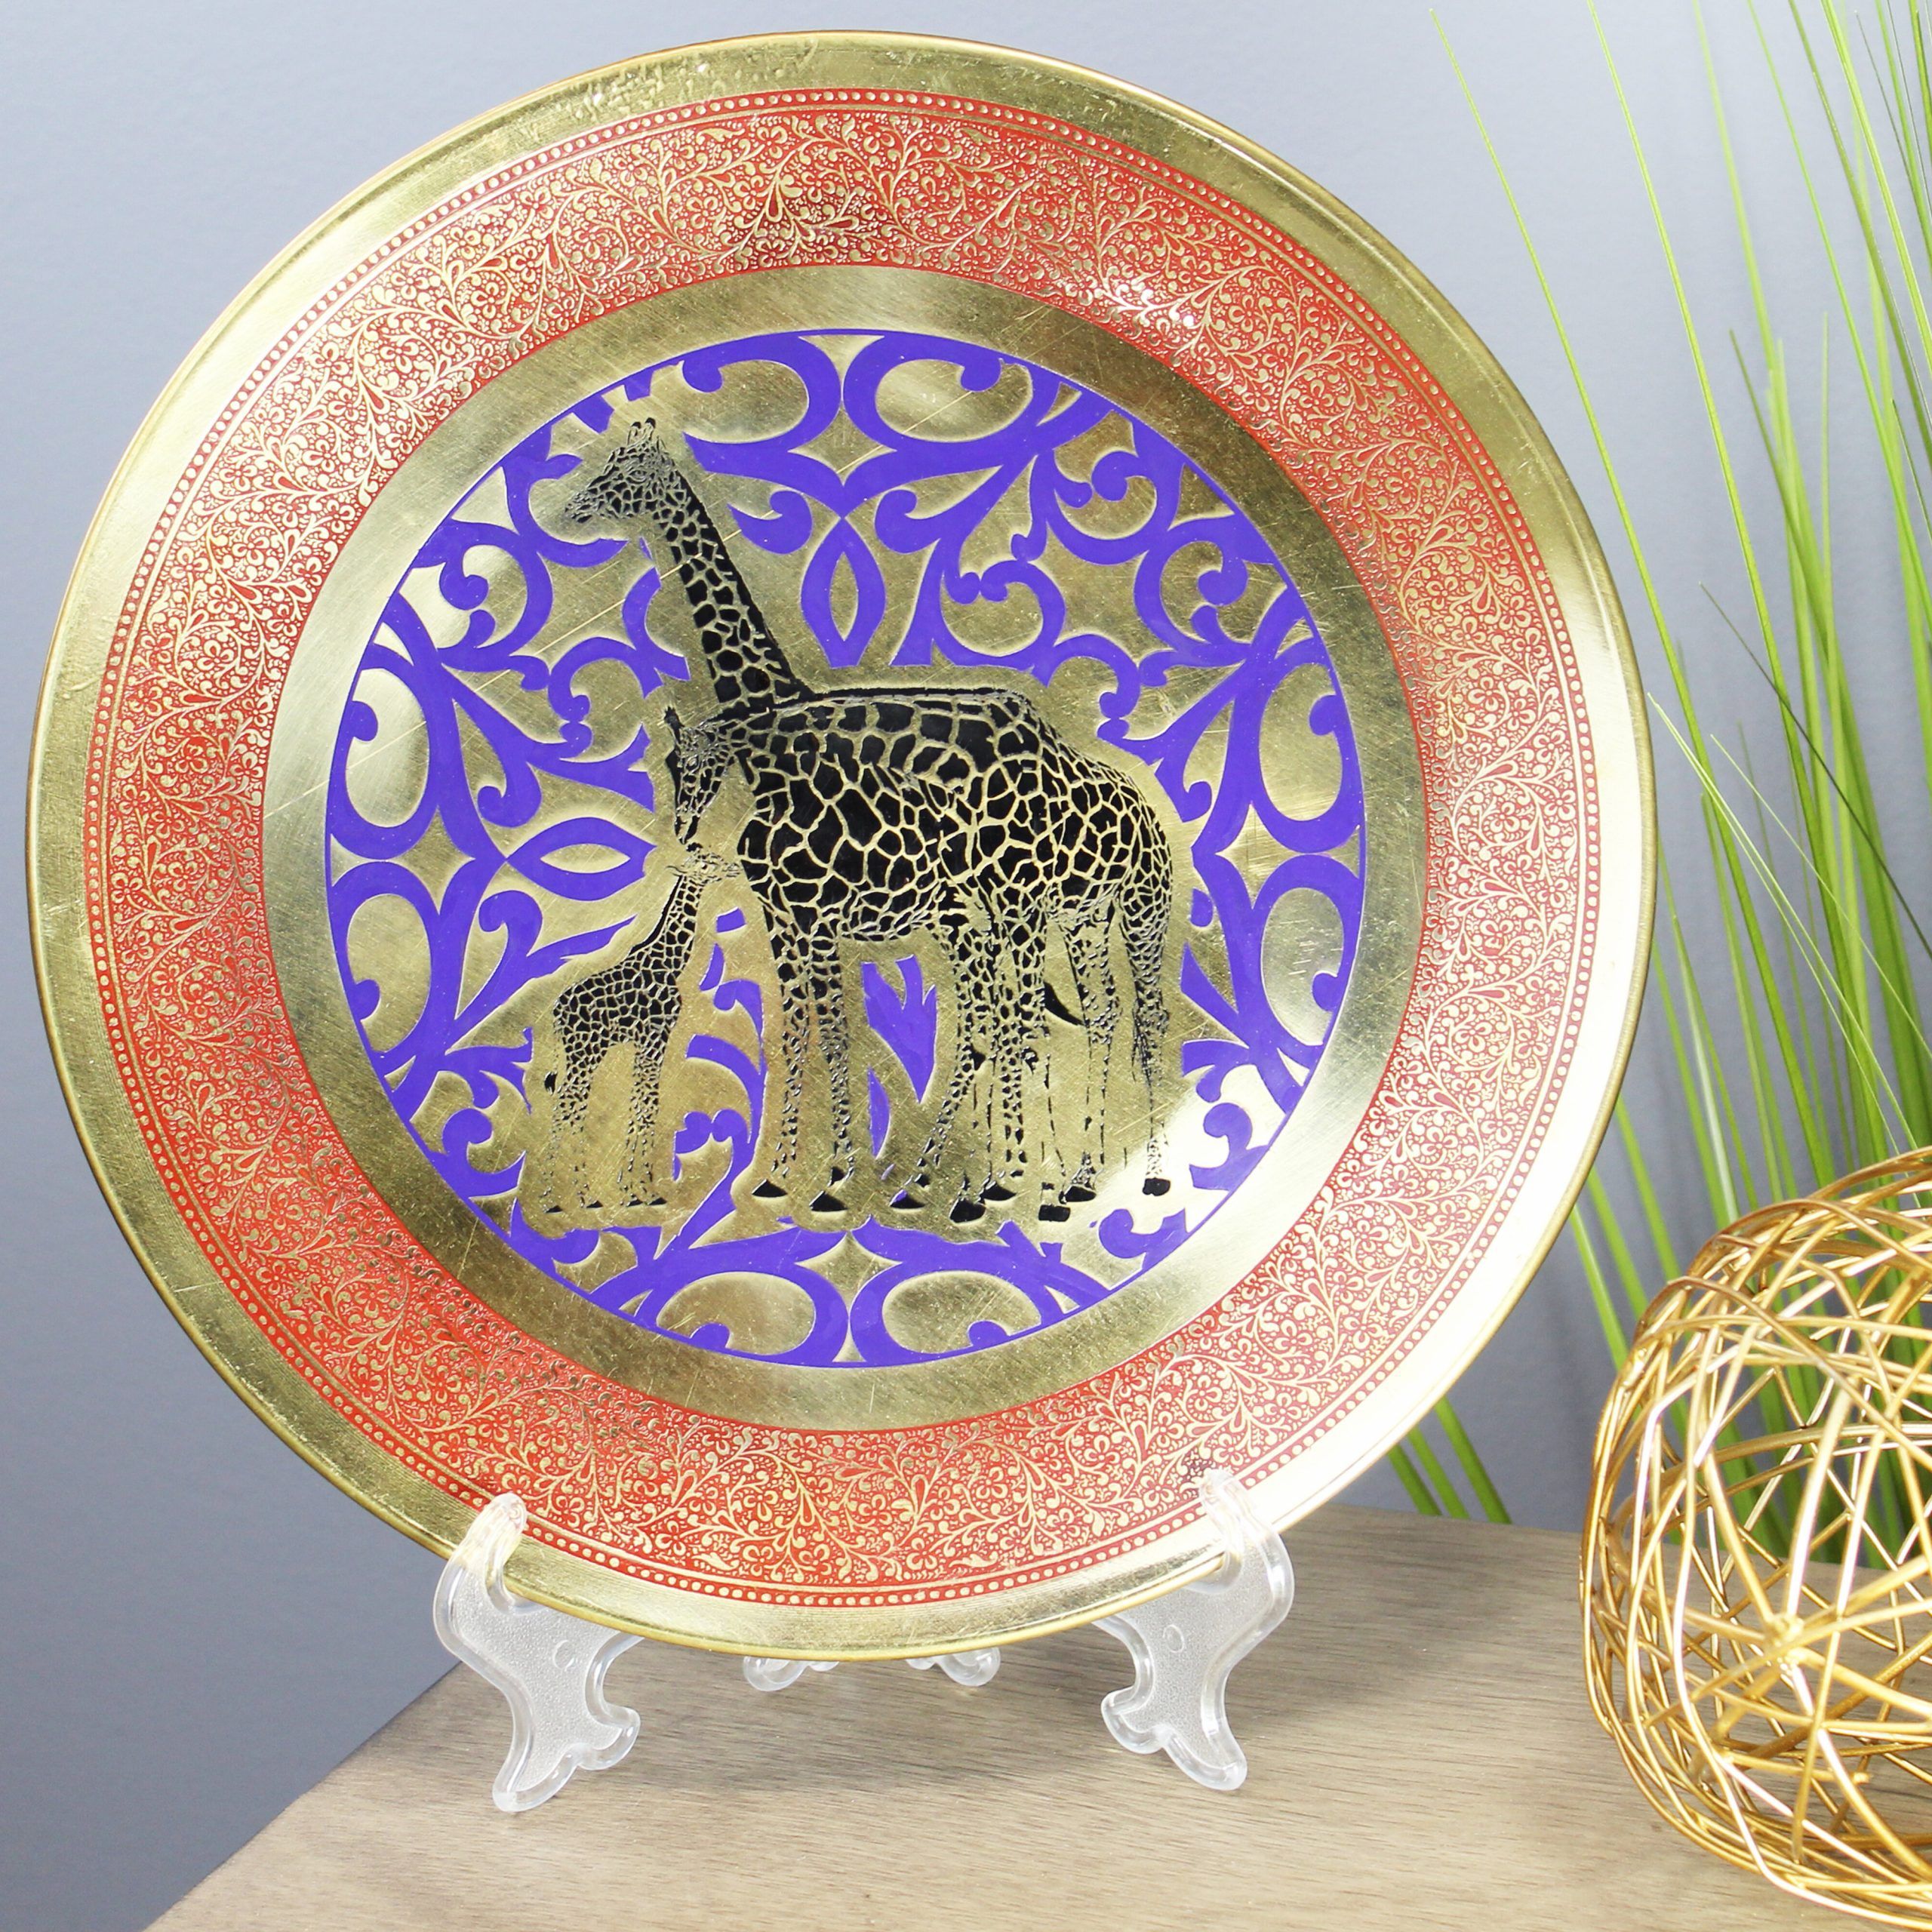 2020 Tioga Metal Decorative Plate With Floral Plate Wall Décor By World Menagerie (View 20 of 20)